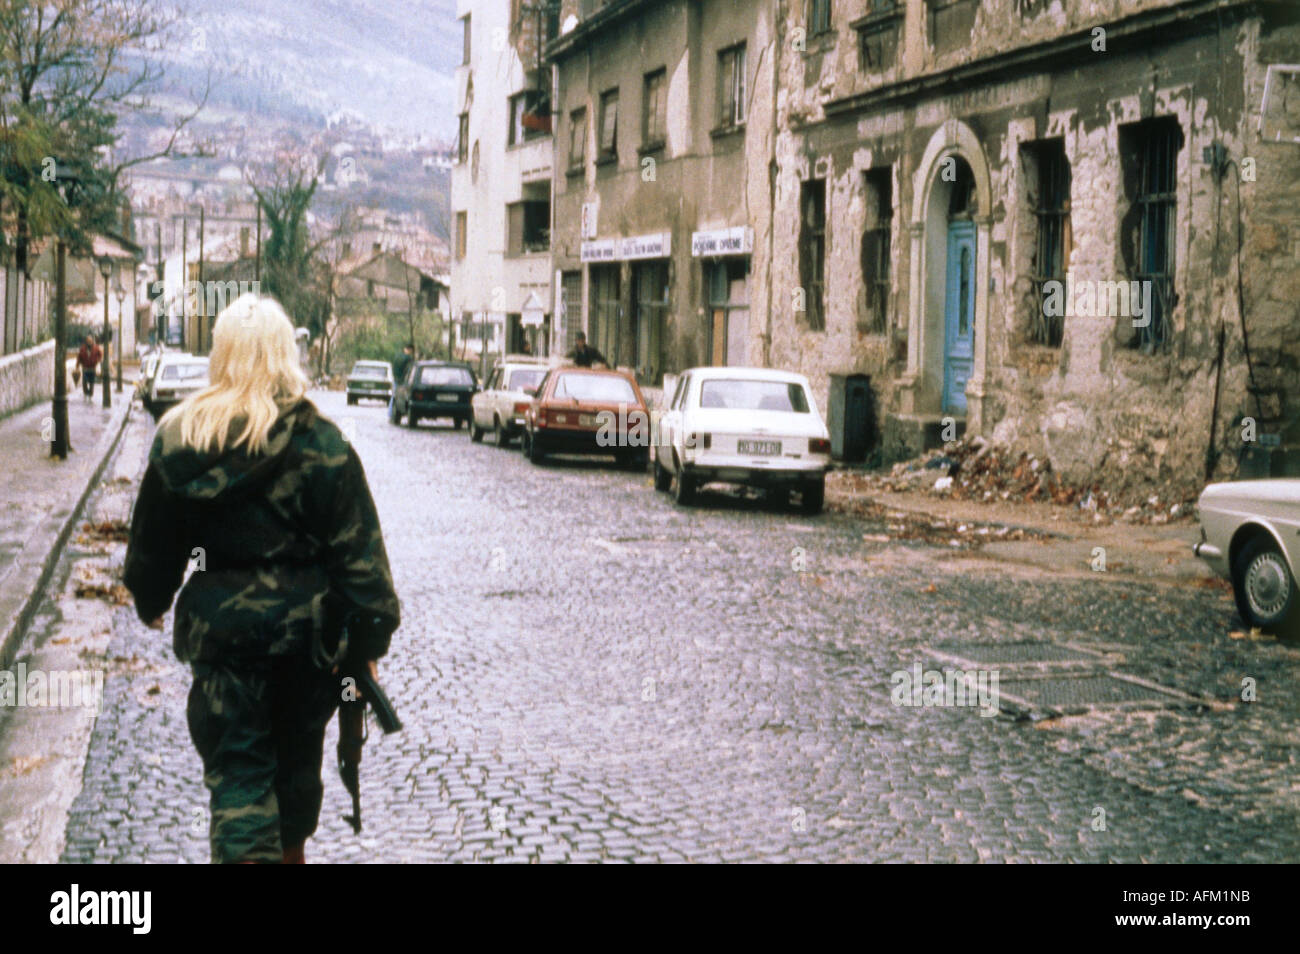 events, Bosnian War 1991 - 1995, woman from the militia in the street, Mostar, 21.2.1992, former Yugoslavia, Herzegovina, weapon, historic, historical, 20th century, people, 1990s, women, female, Stock Photo